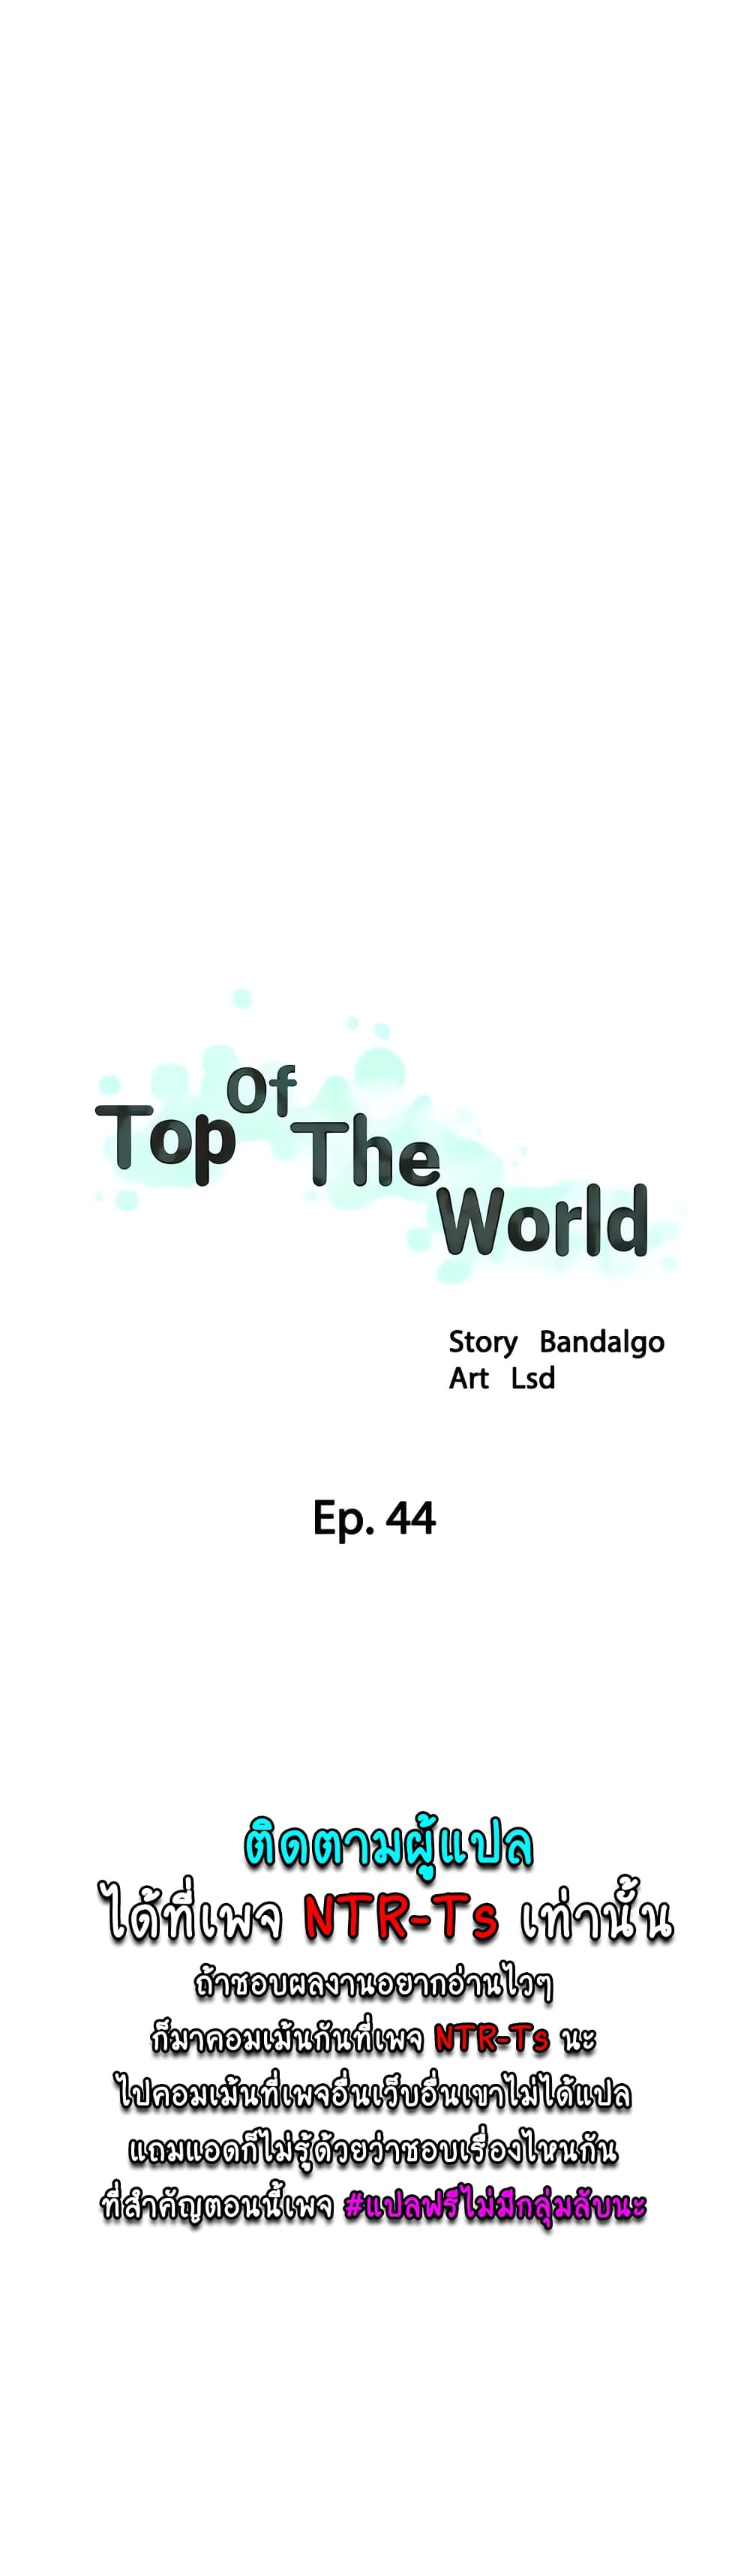 Top Of The World 44-44